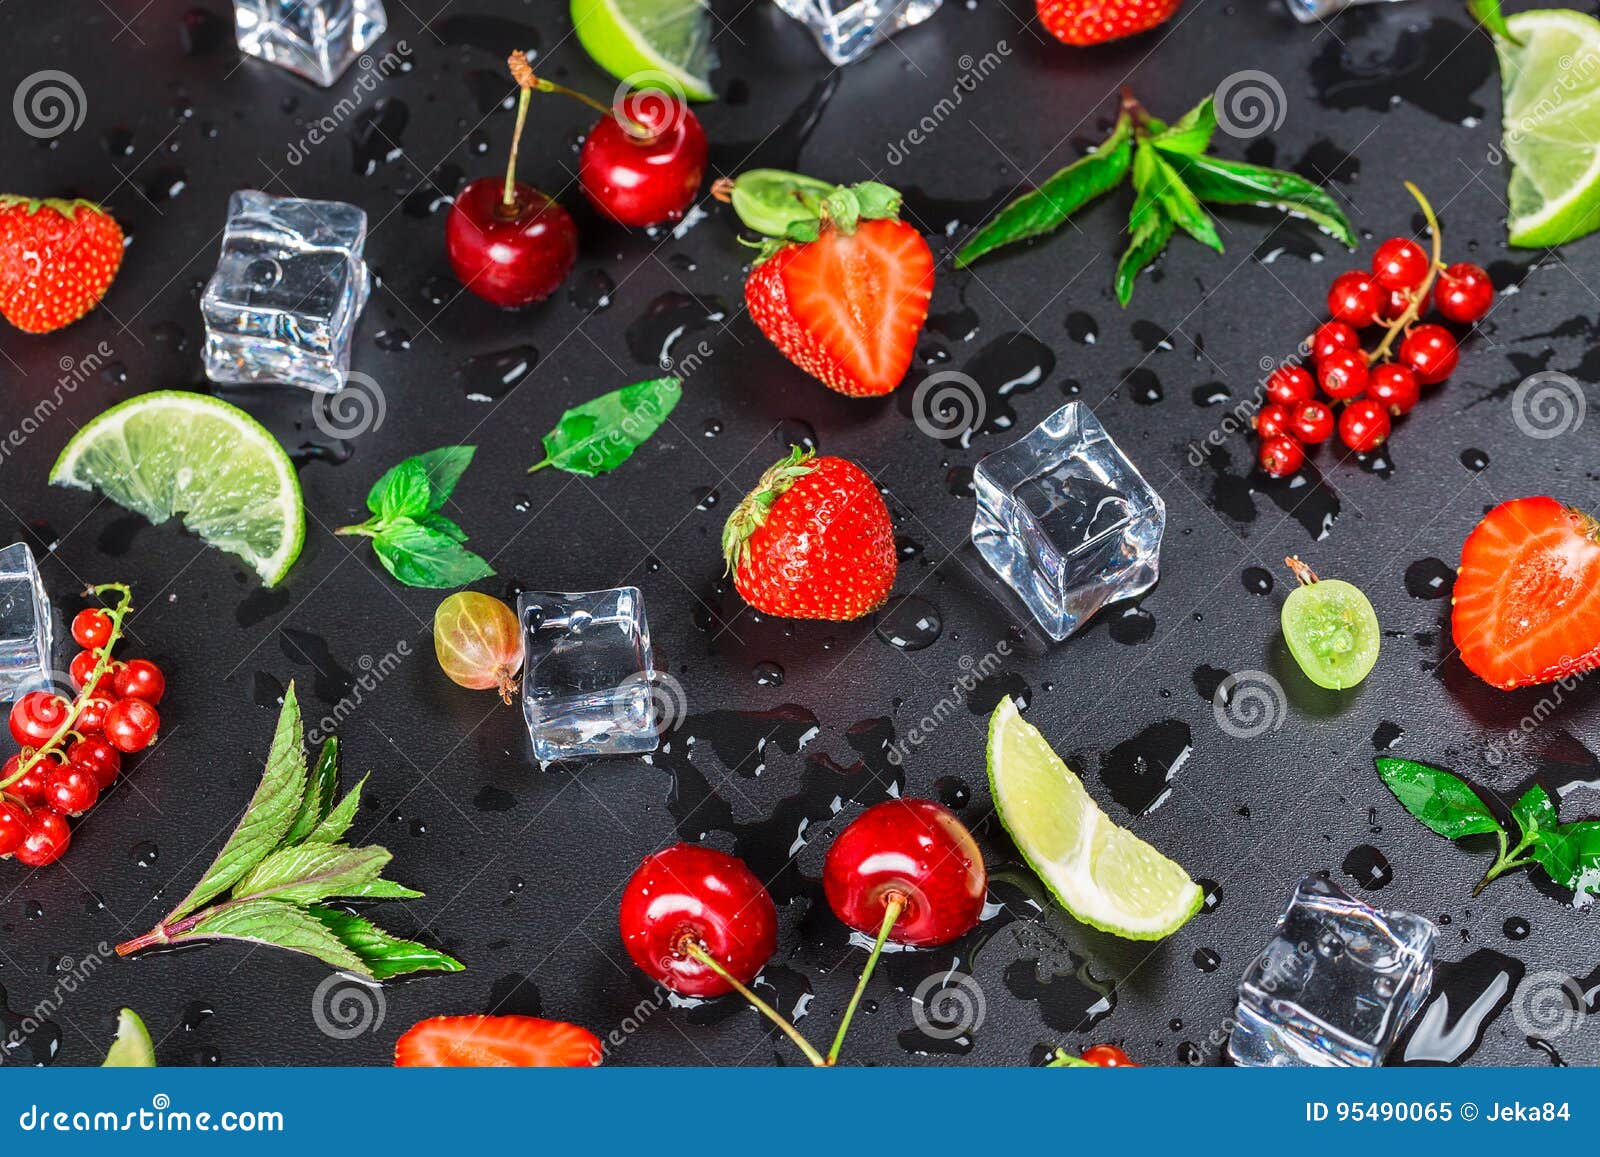 summer`s freshest fruit and berries currants, gooseberries, cherries, limes, strawberries and fresh mint leaves